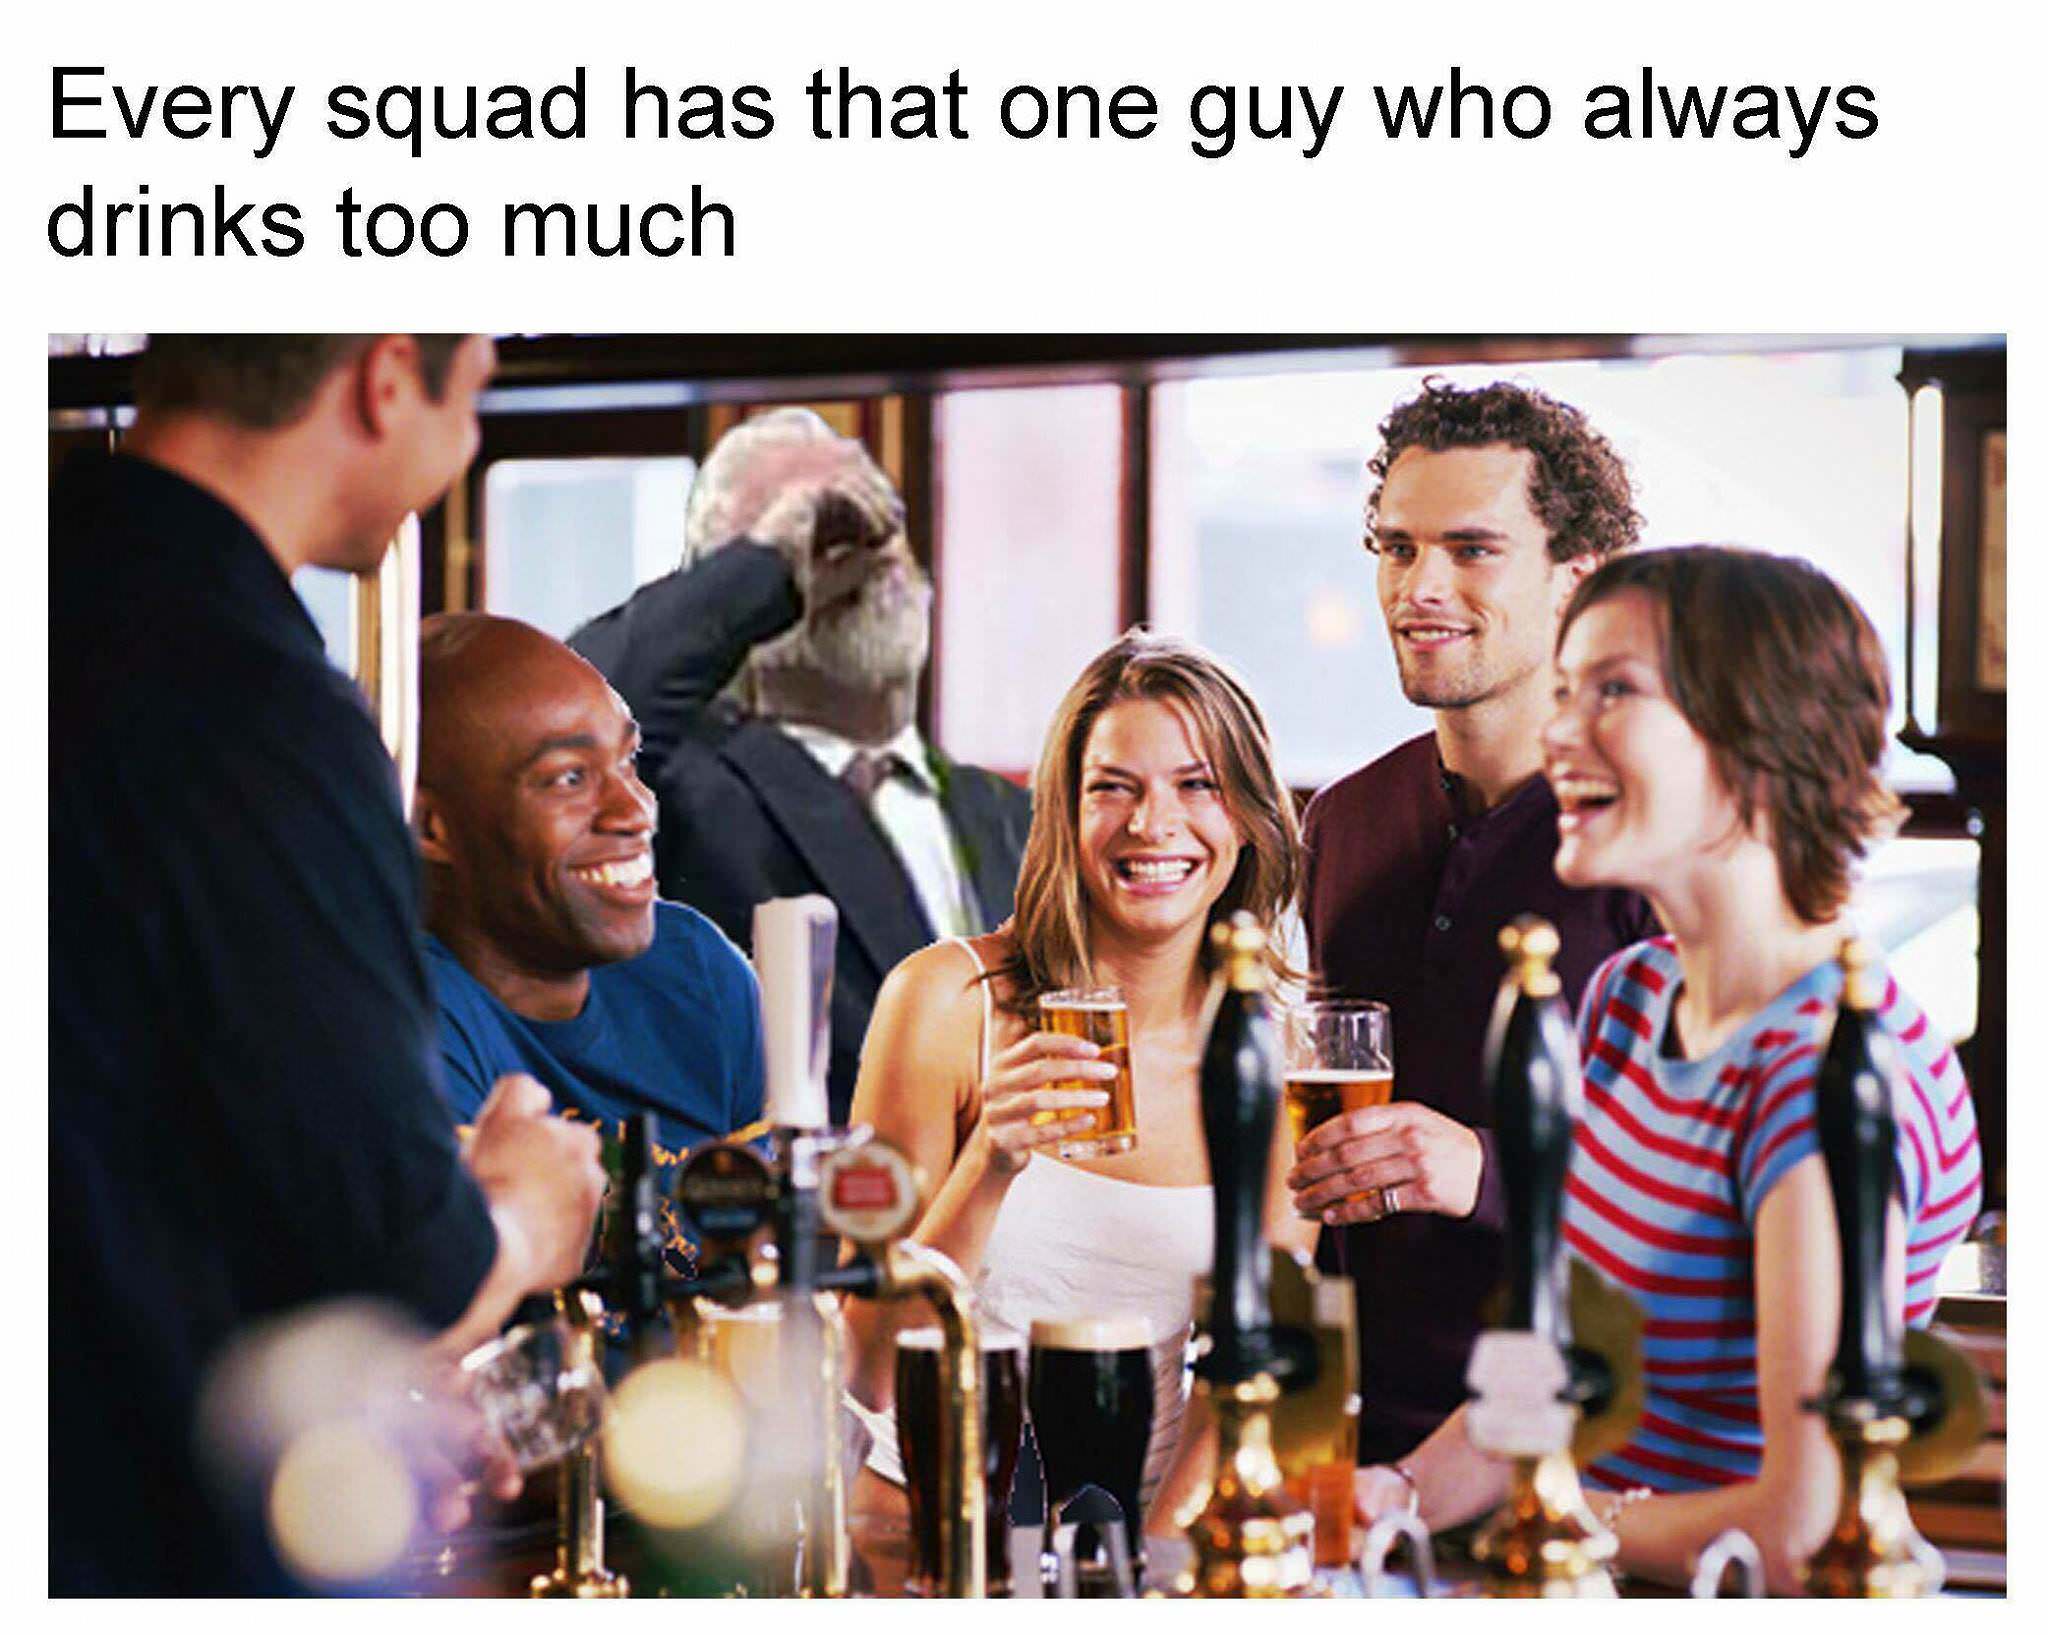 every squad has one meme - Every squad has that one guy who always drinks too much